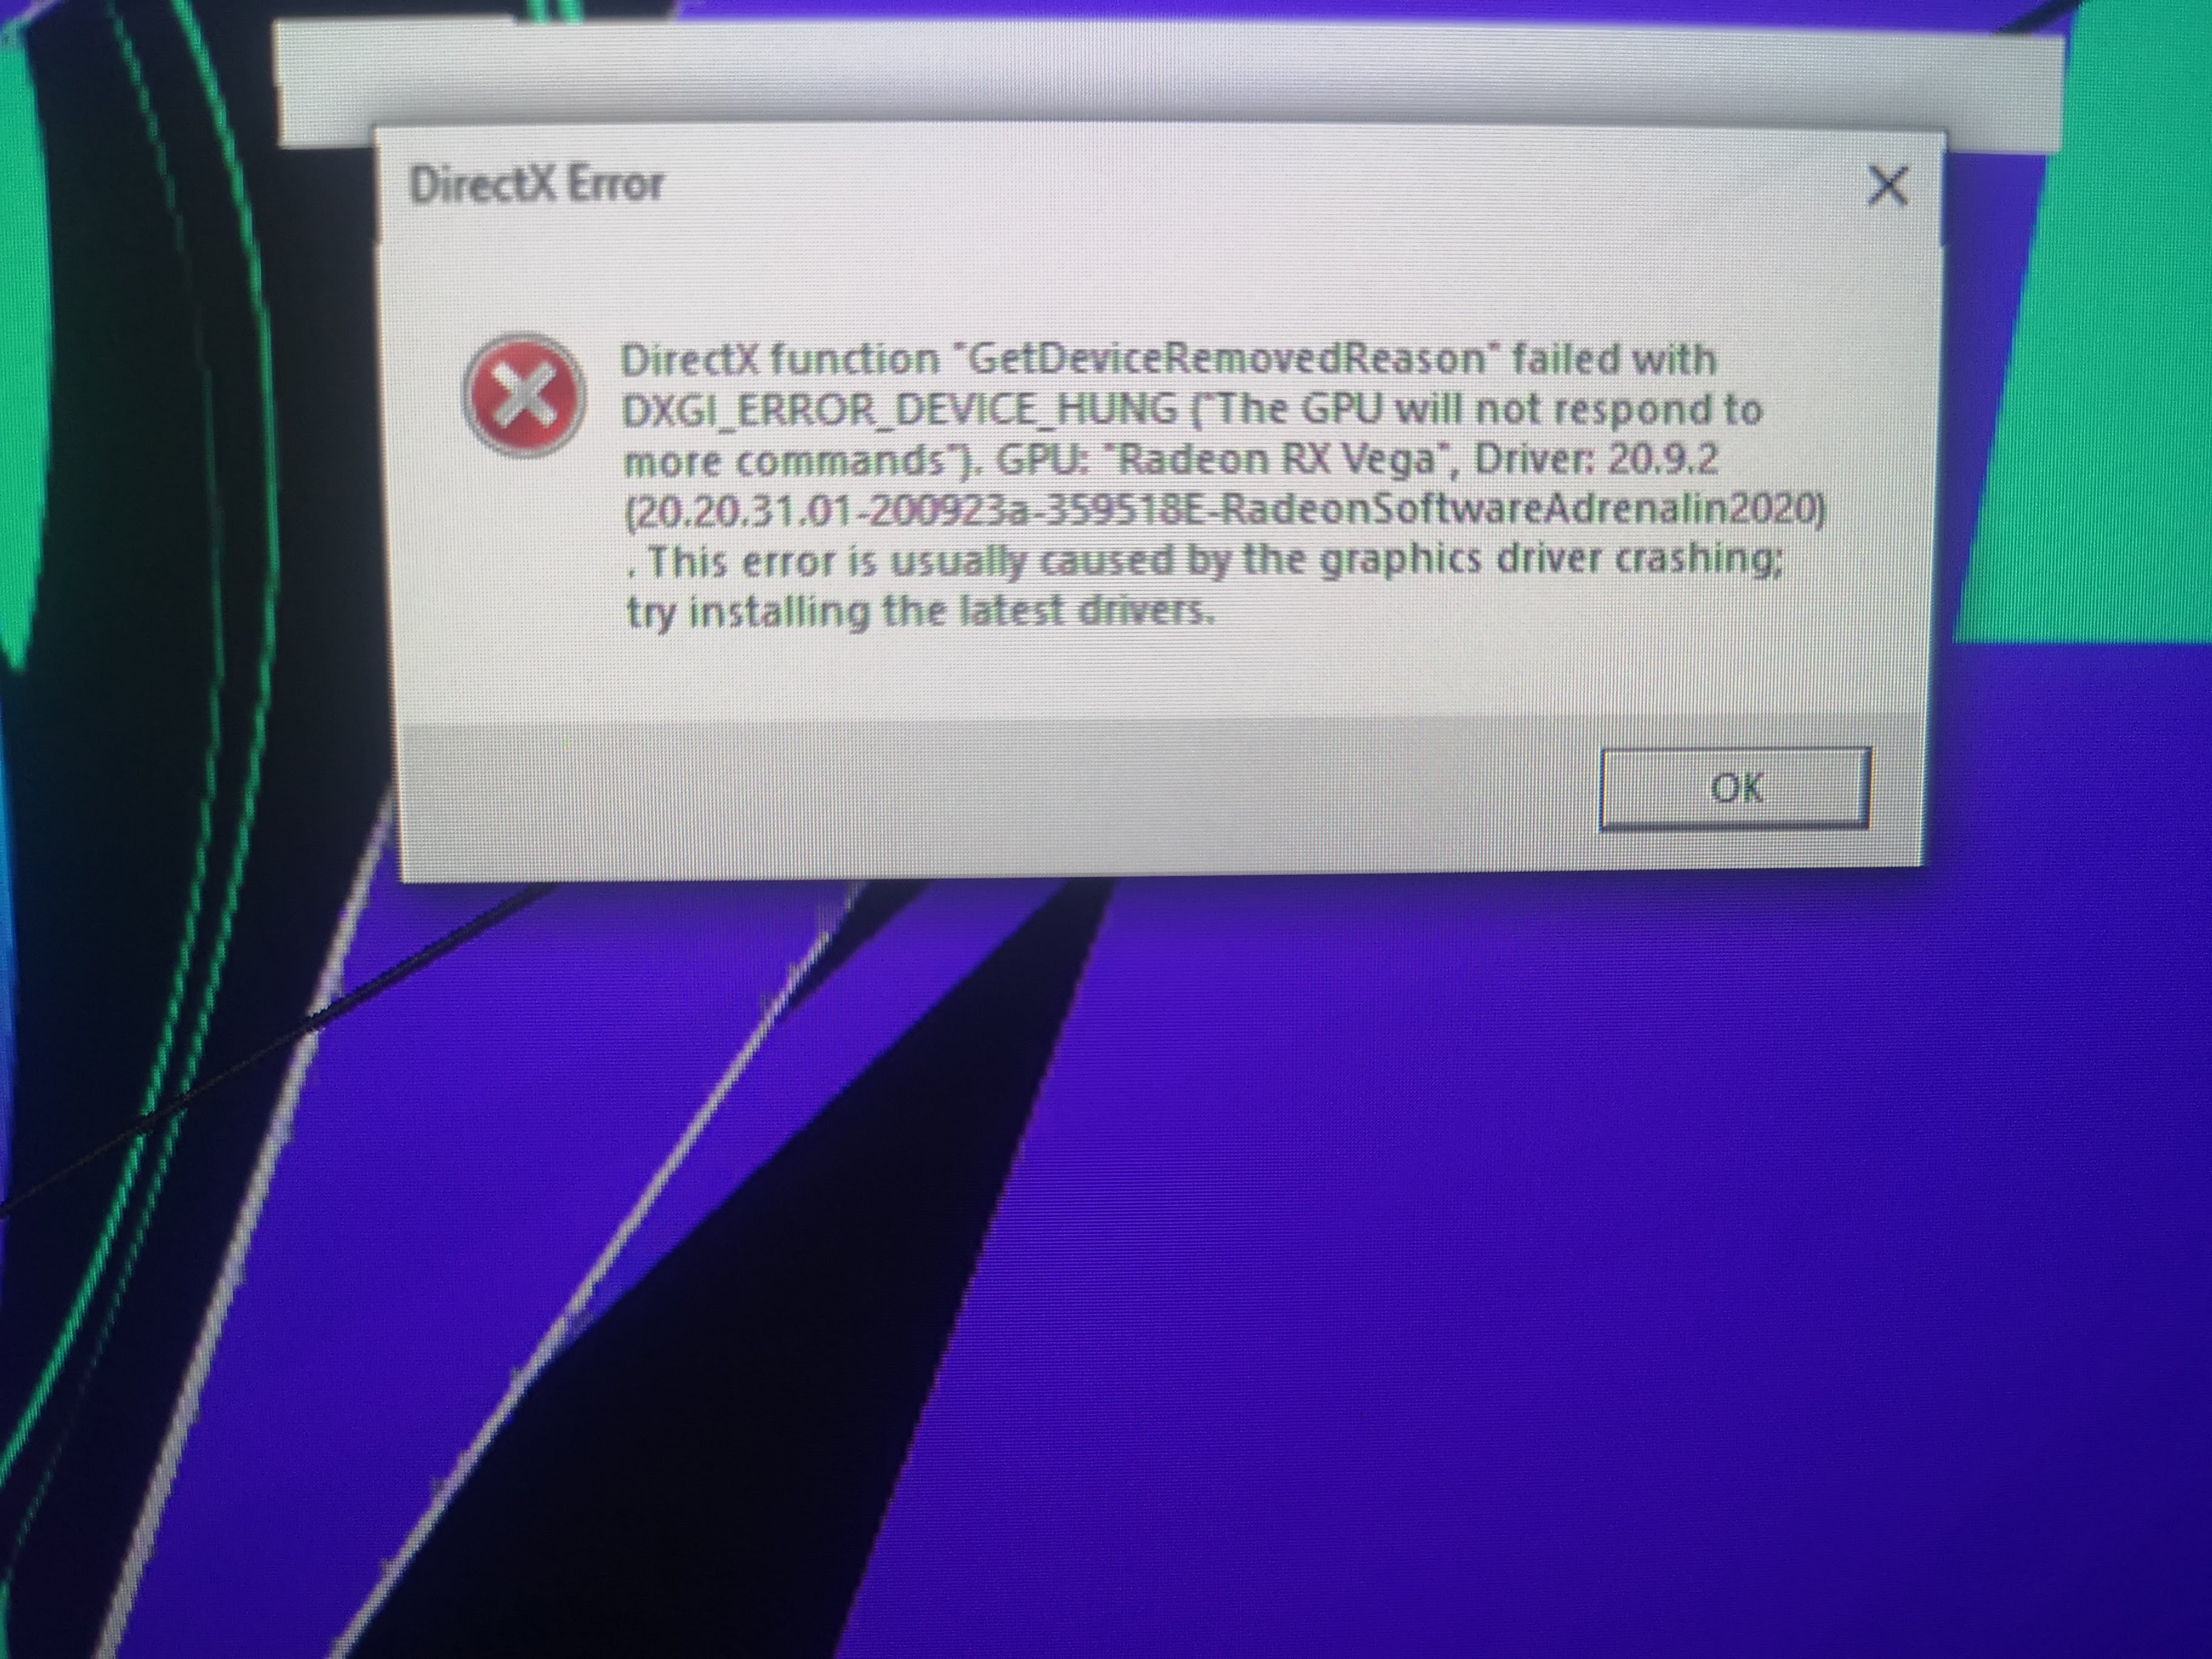 Directx function failed. Ошибка dxgi_Error_device_hung. Ошибка в Apex Legends 0x887a0006 dxgi_Error_device_hung. Ошибка DIRECTX function GETDEVICEREMOVEDREASON failed with dxgi_Error_device_hung. Dxgi_Error_device_hung Апекс.